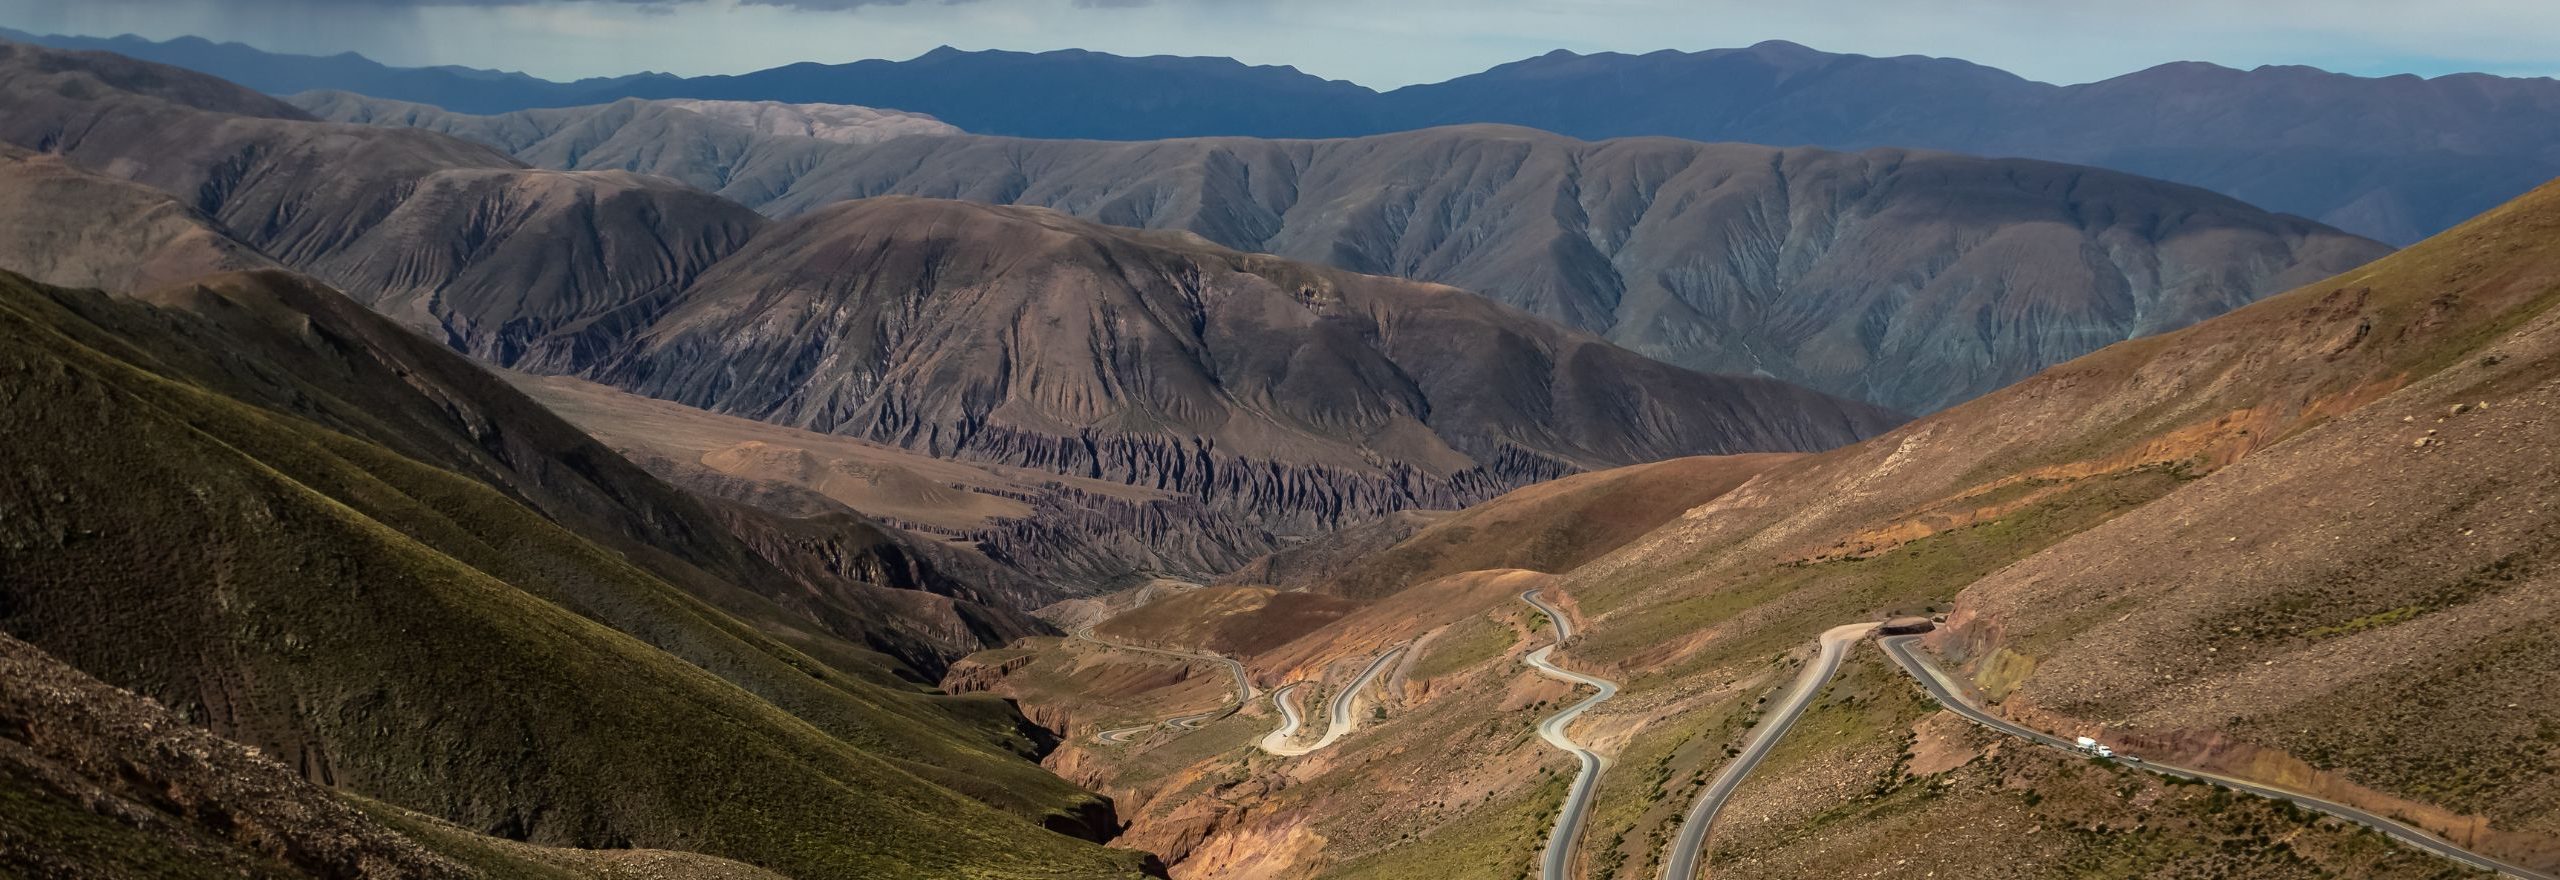 Explore the colorful landscapes of Argentina on this guided bike tour.